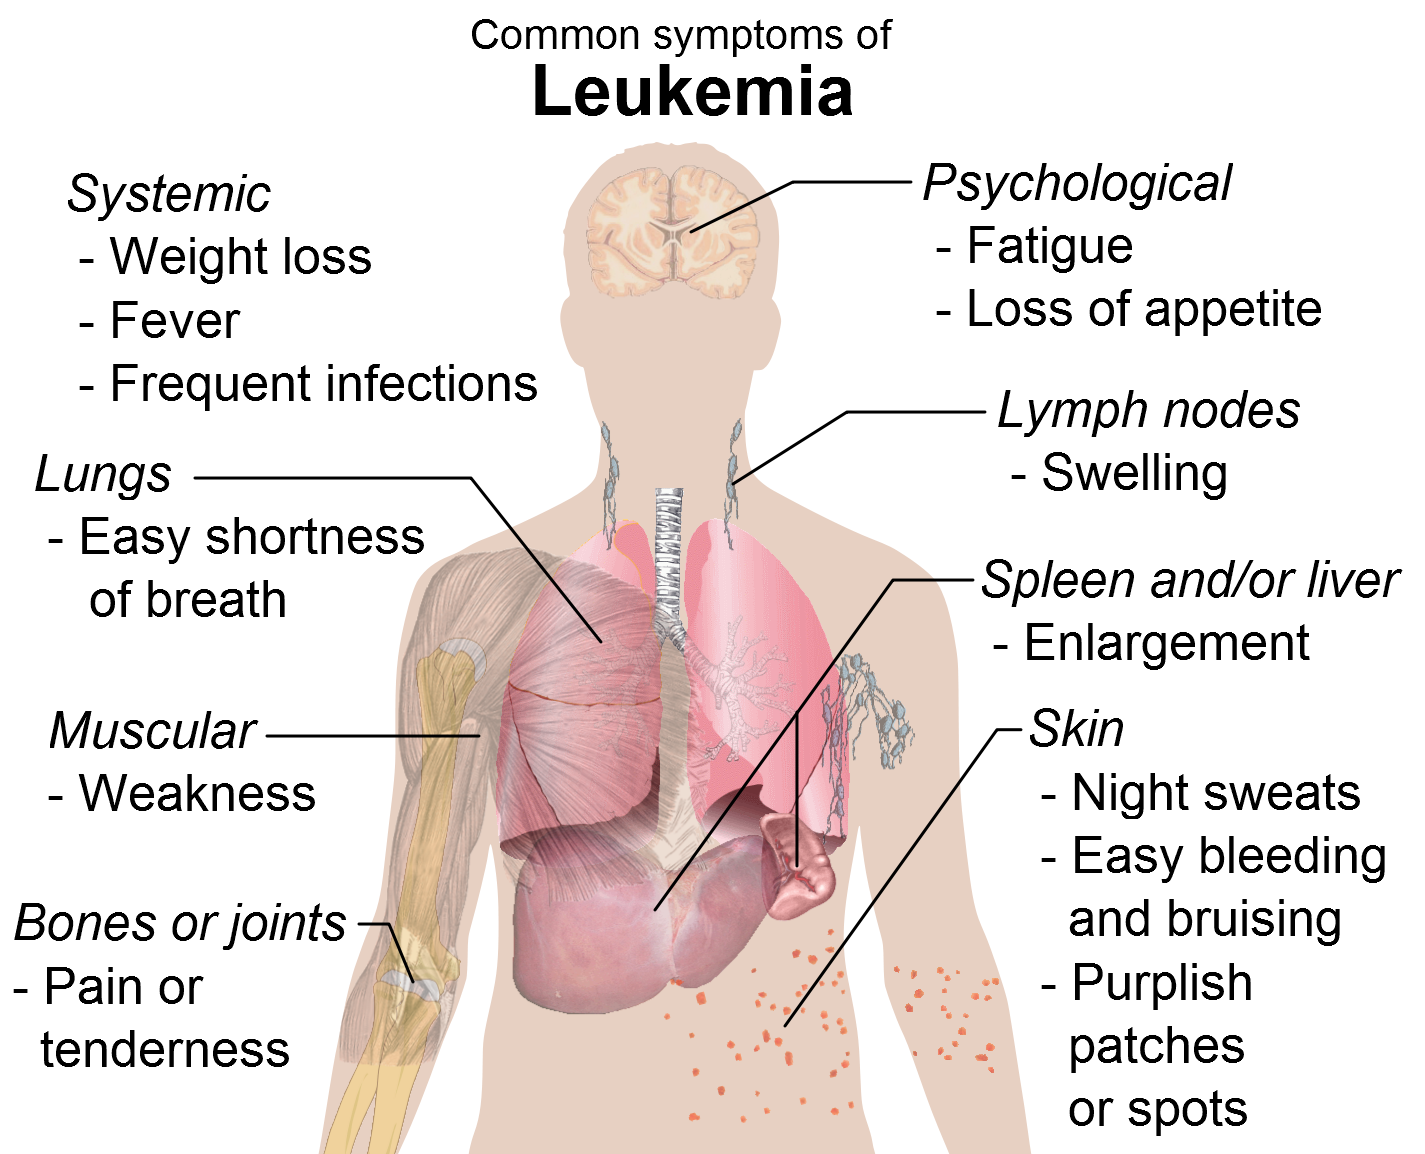 Signs and Symptoms of Leukemia